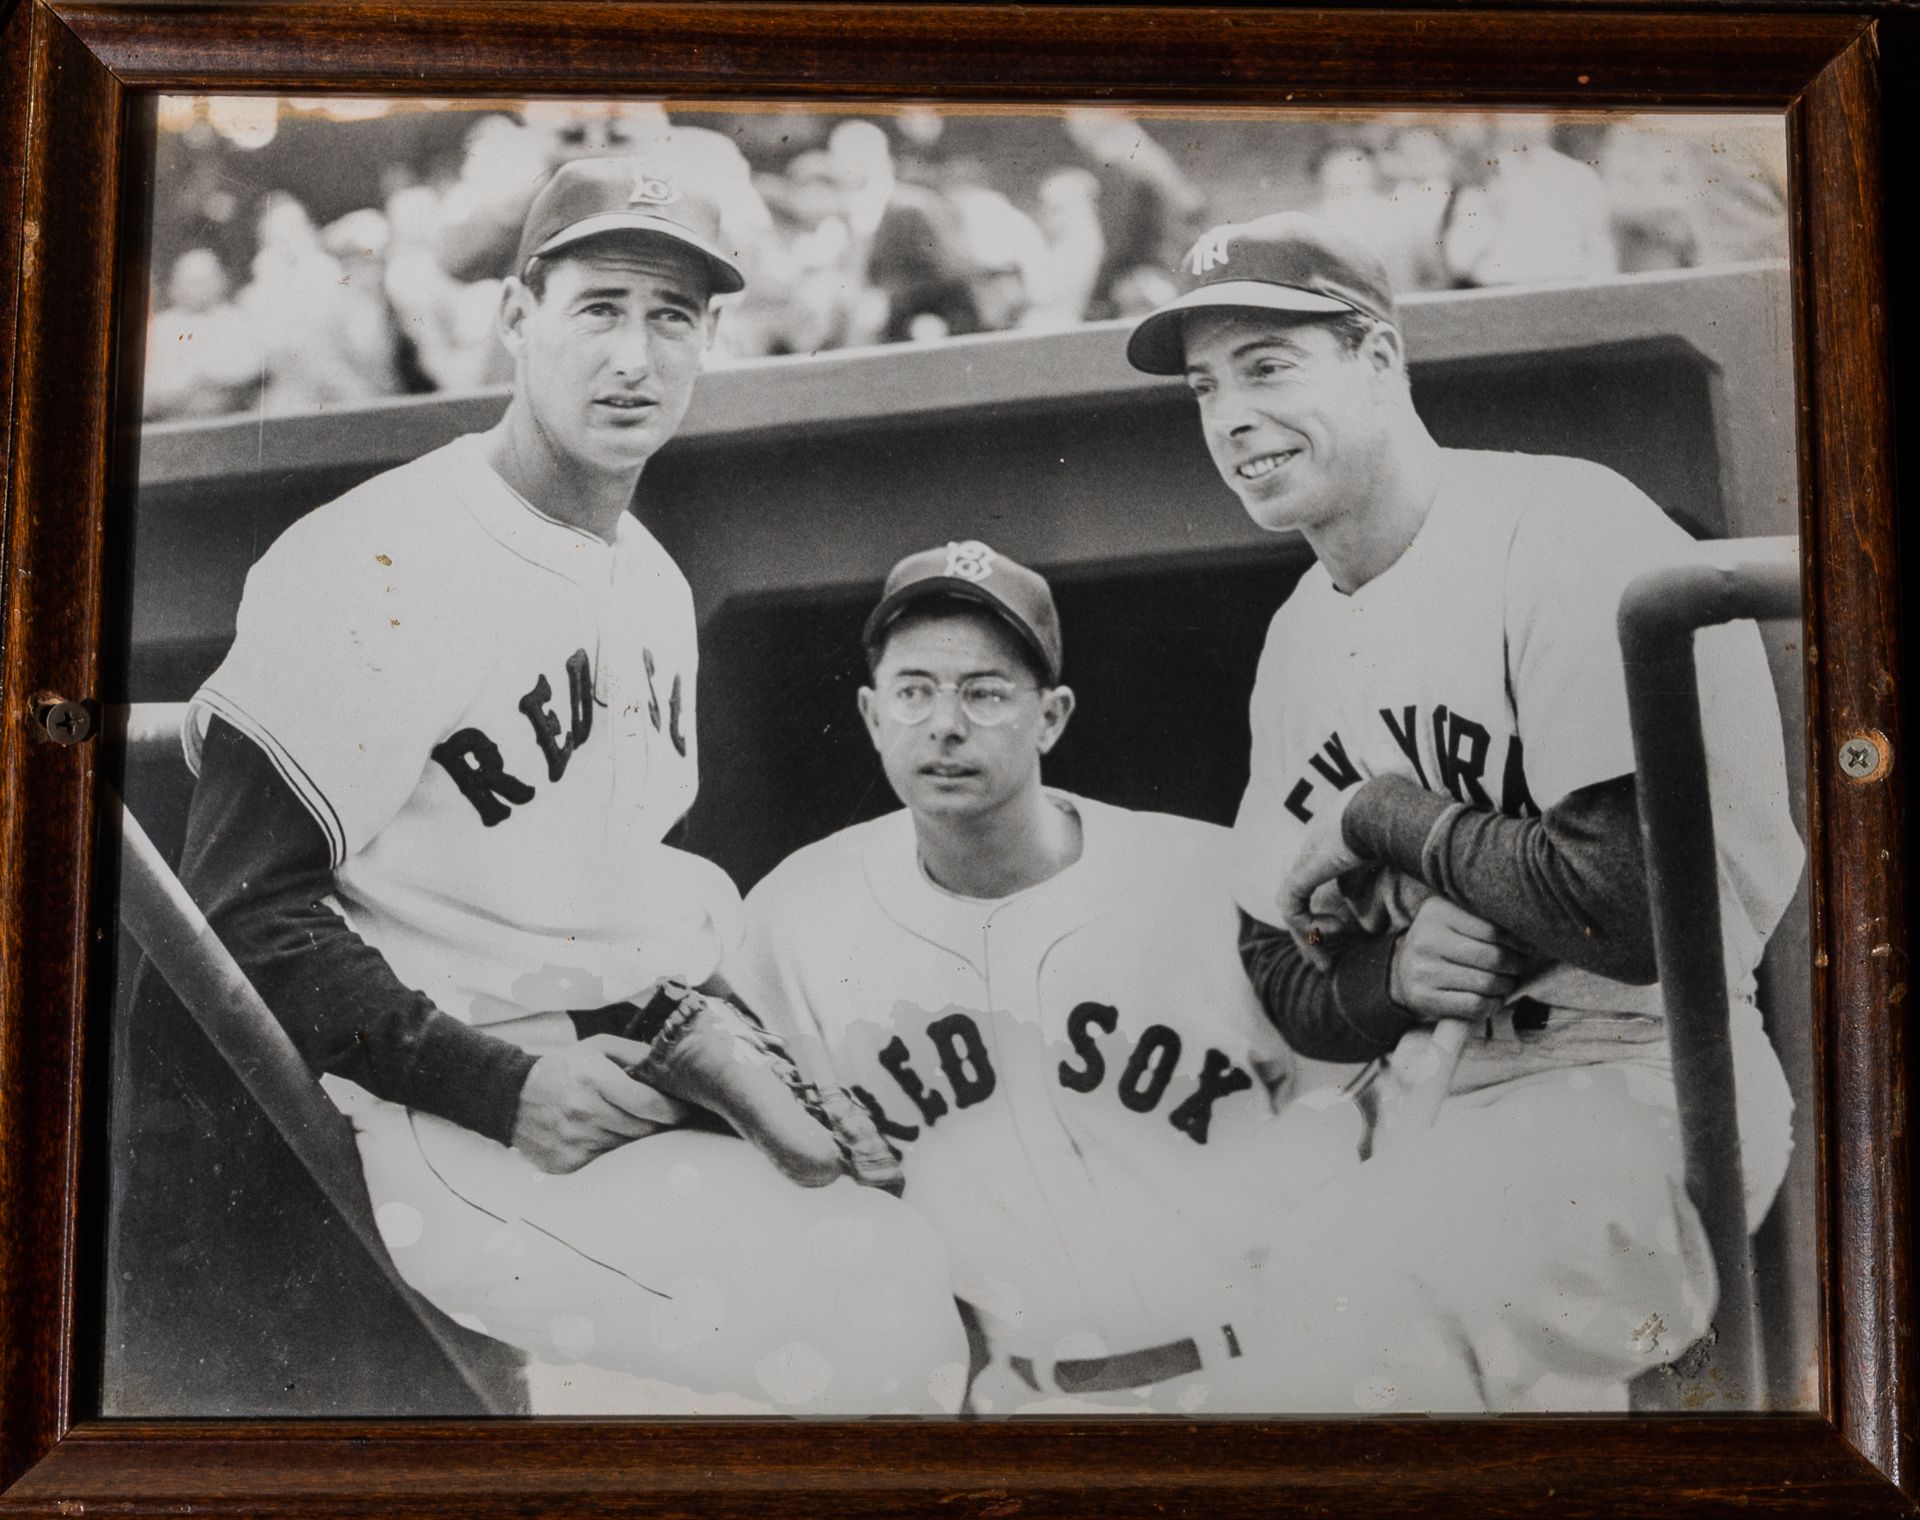 Ted Williams and The DiMaggio Brothers Framed Photo 15"x12" (PHOTO HAS WATER DAMAGE)